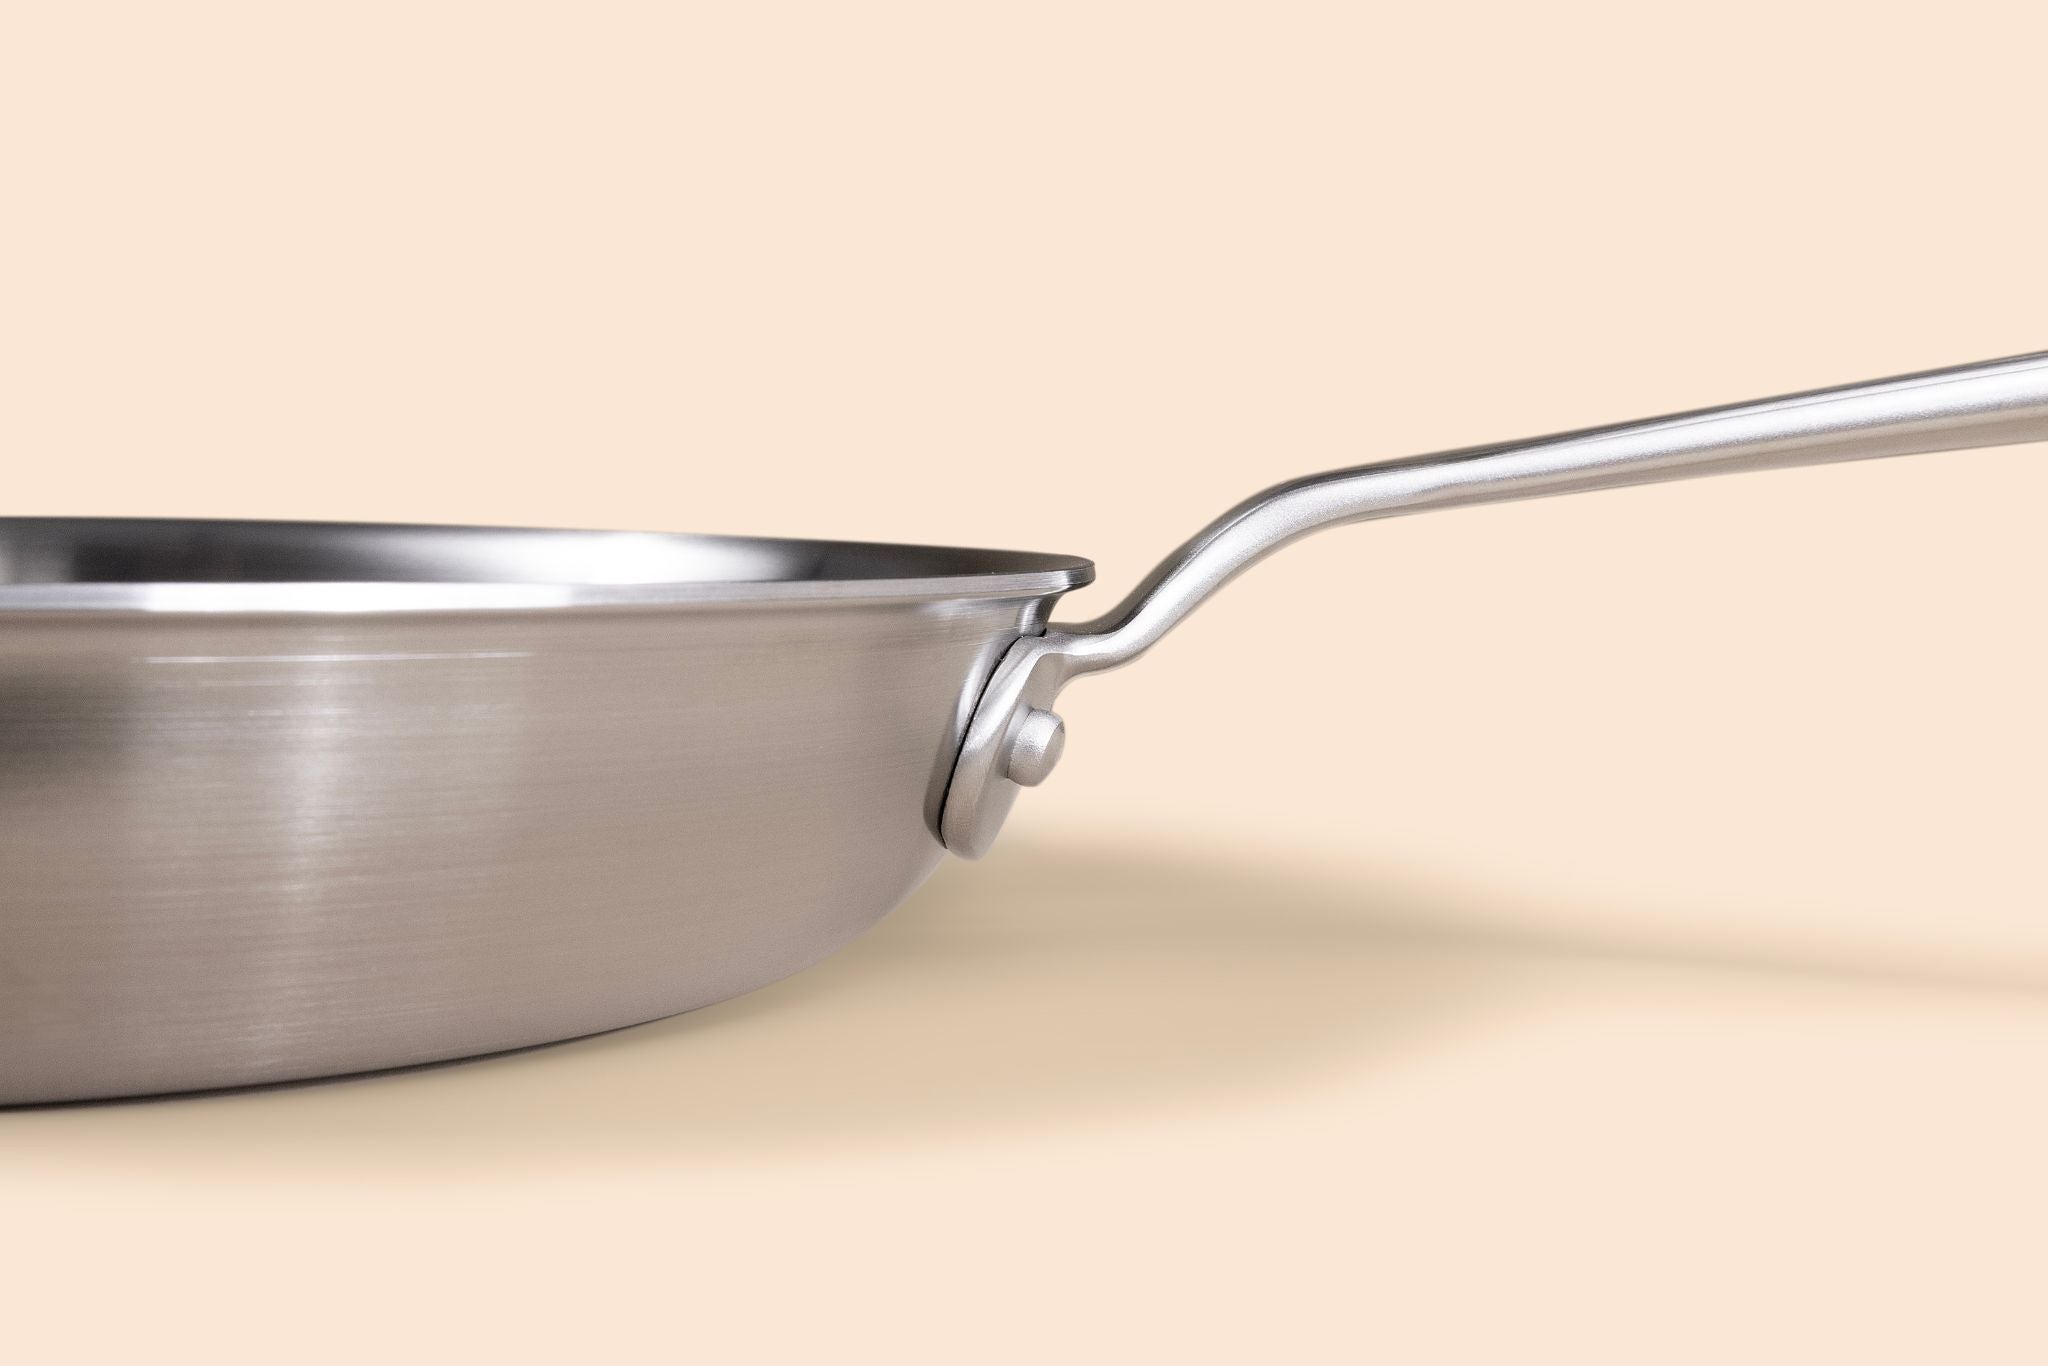 Stainless Clad Saute Pan